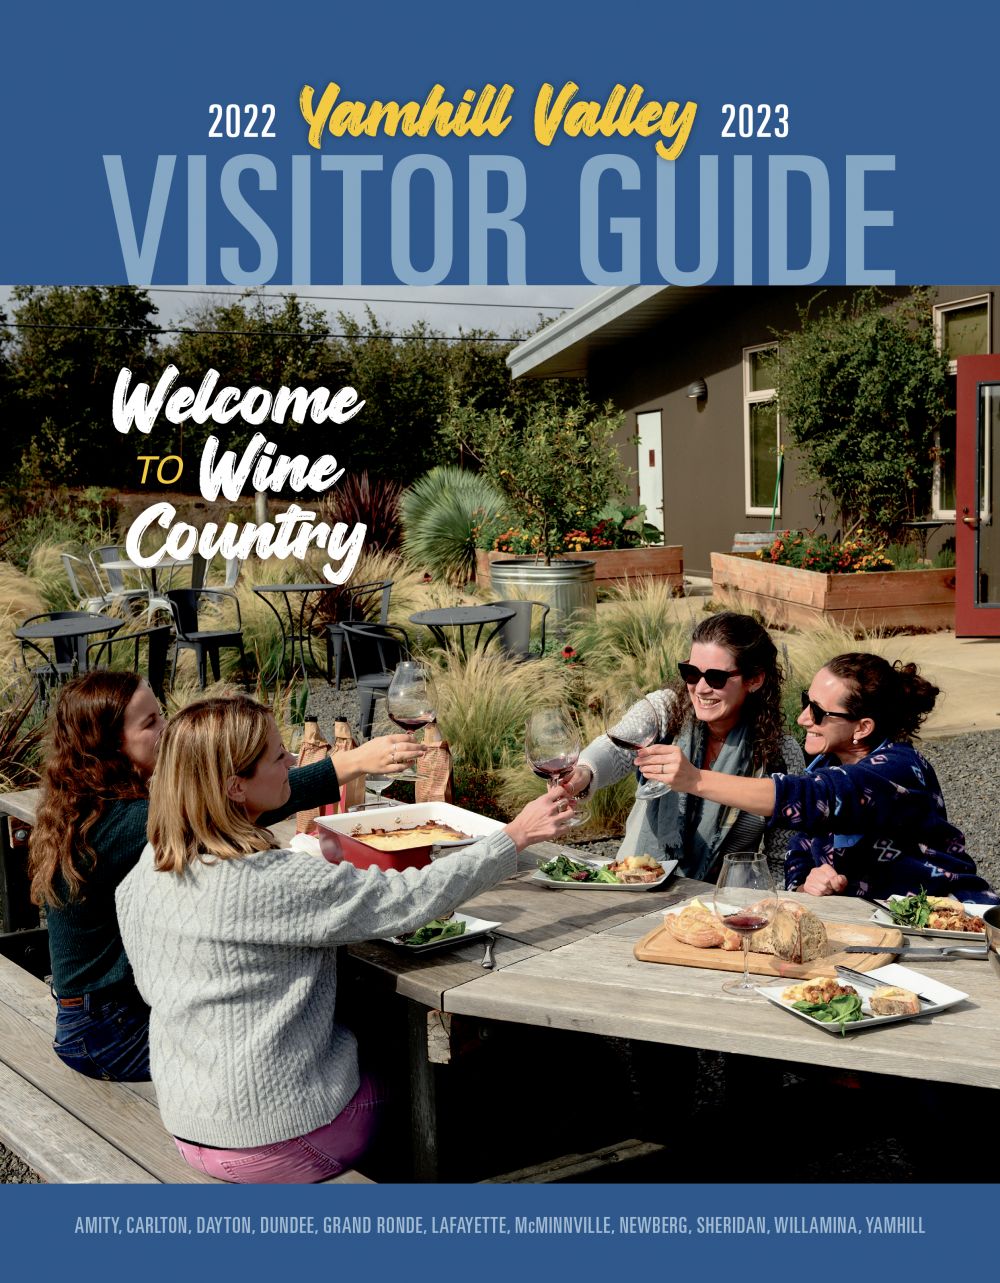 Visitor Guide 2022